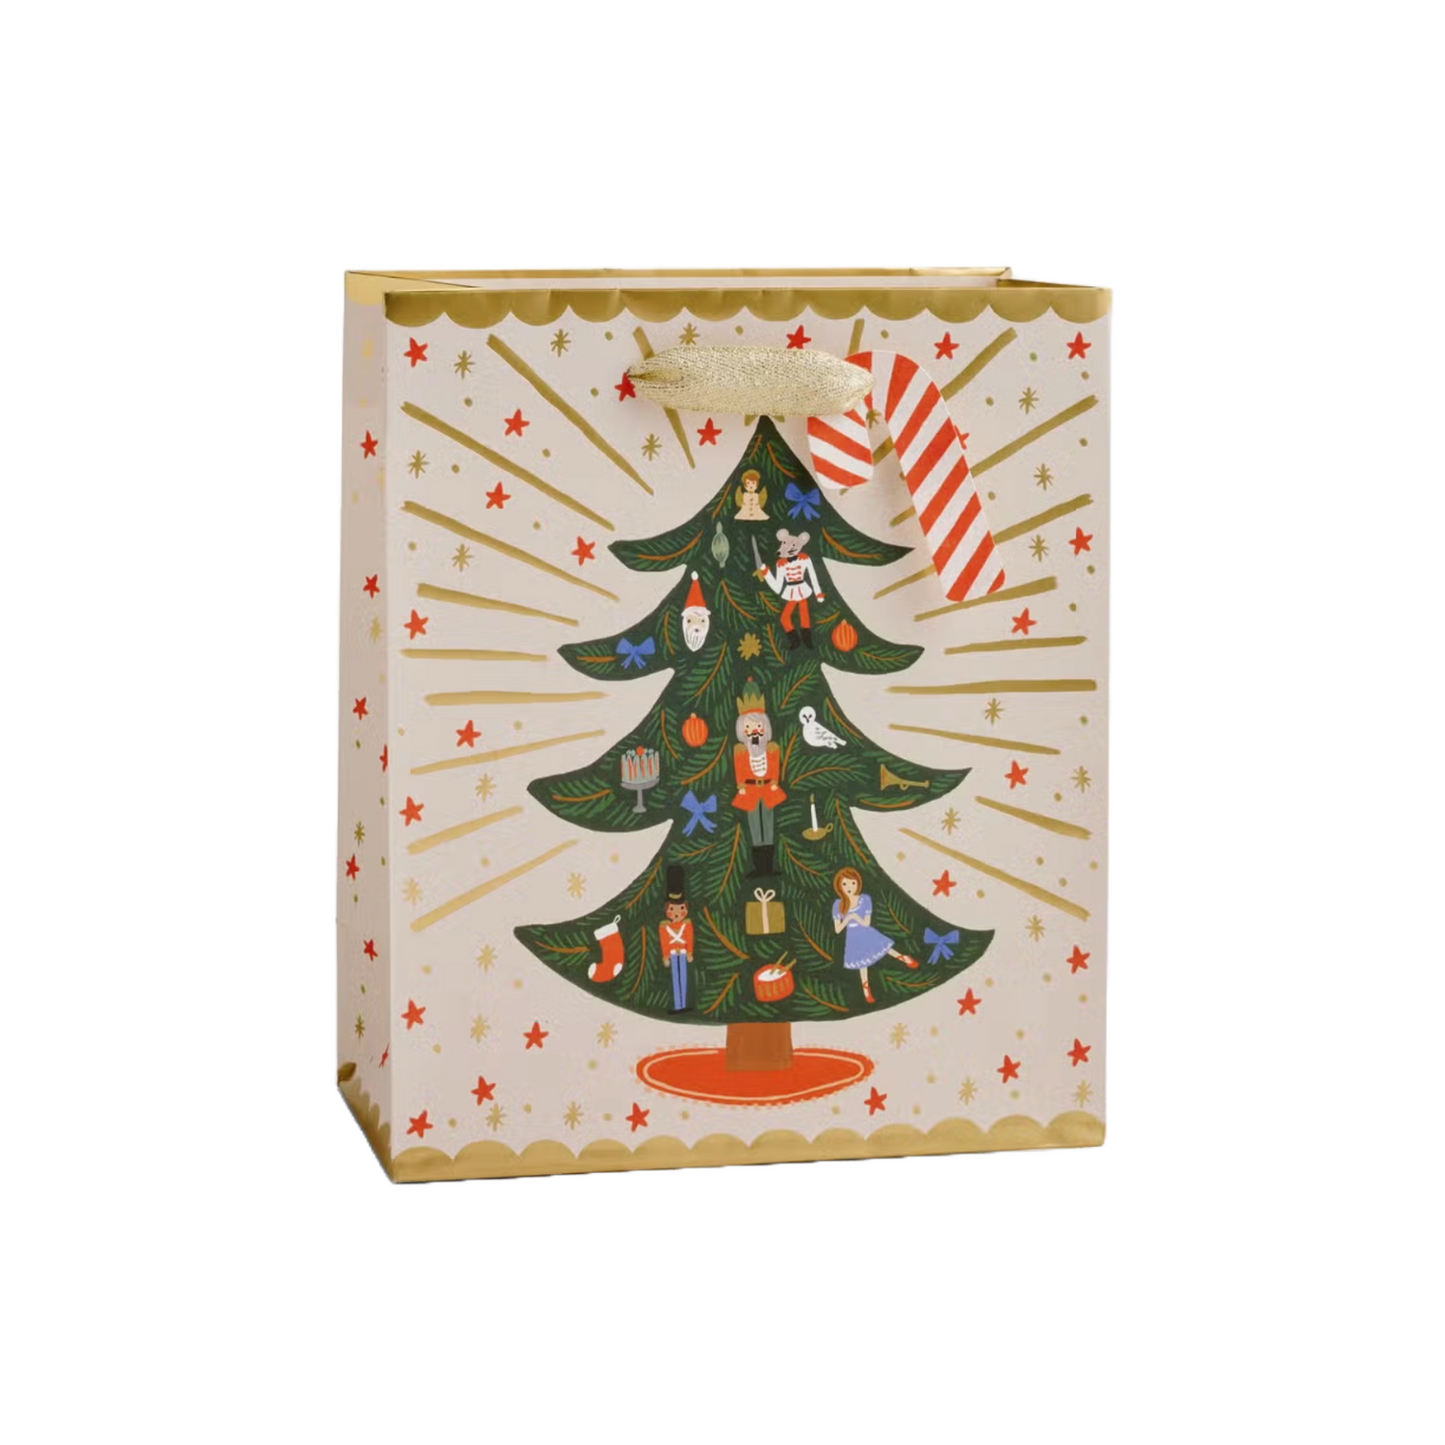 Medium Nutcracker Sweets Gift Bag by Rifle Paper Co.